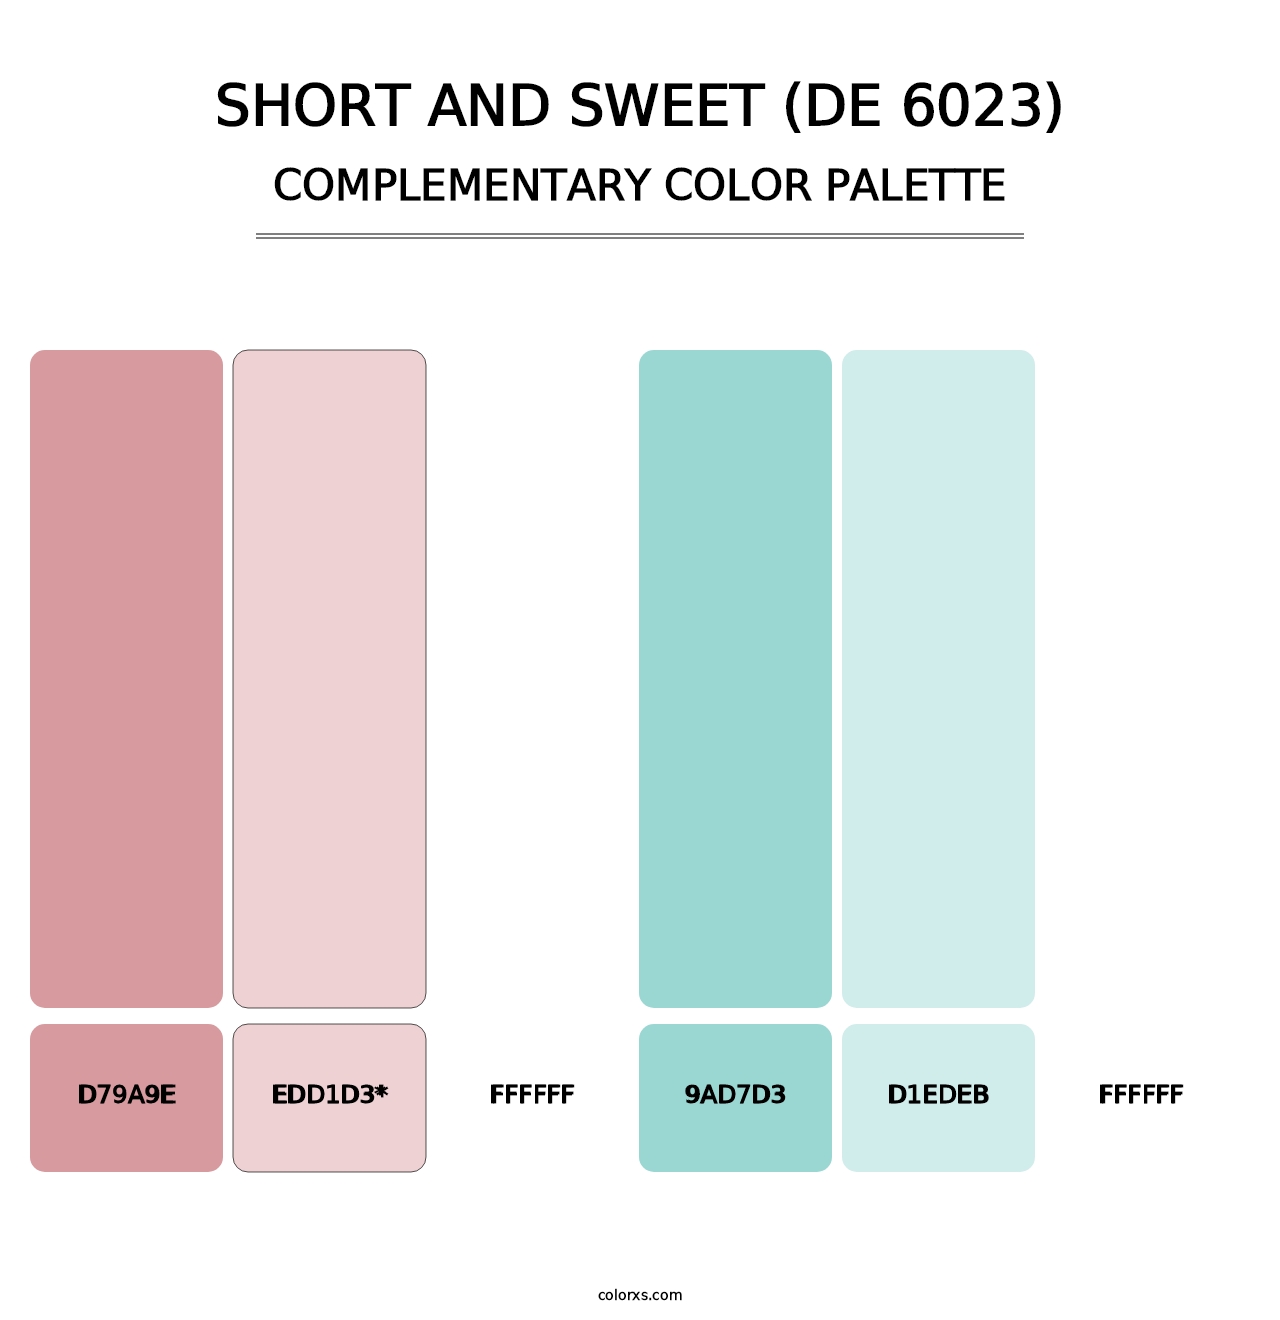 Short and Sweet (DE 6023) - Complementary Color Palette